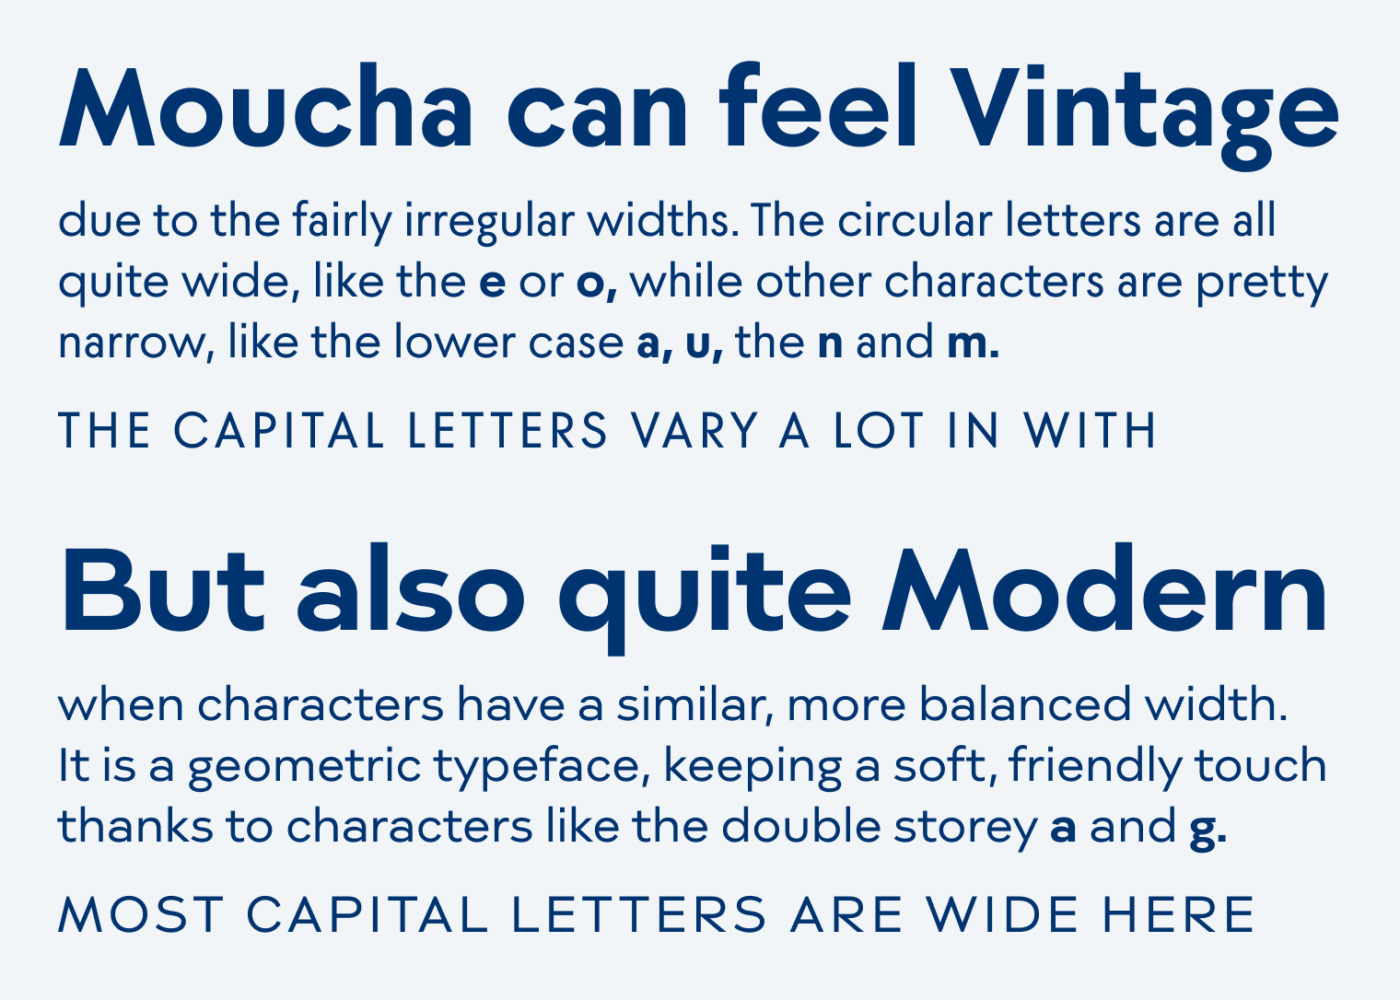 Moucha can feel Vintage due to the fairly irregular widths. The circular letters are all quite wide, like the e or o, while other characters are pretty narrow, like the lower case a, u, the n and m. The capital letters vary a lot in with.
But also quite Modern when characters have a similar, more balanced width. It is a geometric typeface, keeping a soft, friendly touch thanks to characters like the double storey a and g.
Most capital letters are wide here.